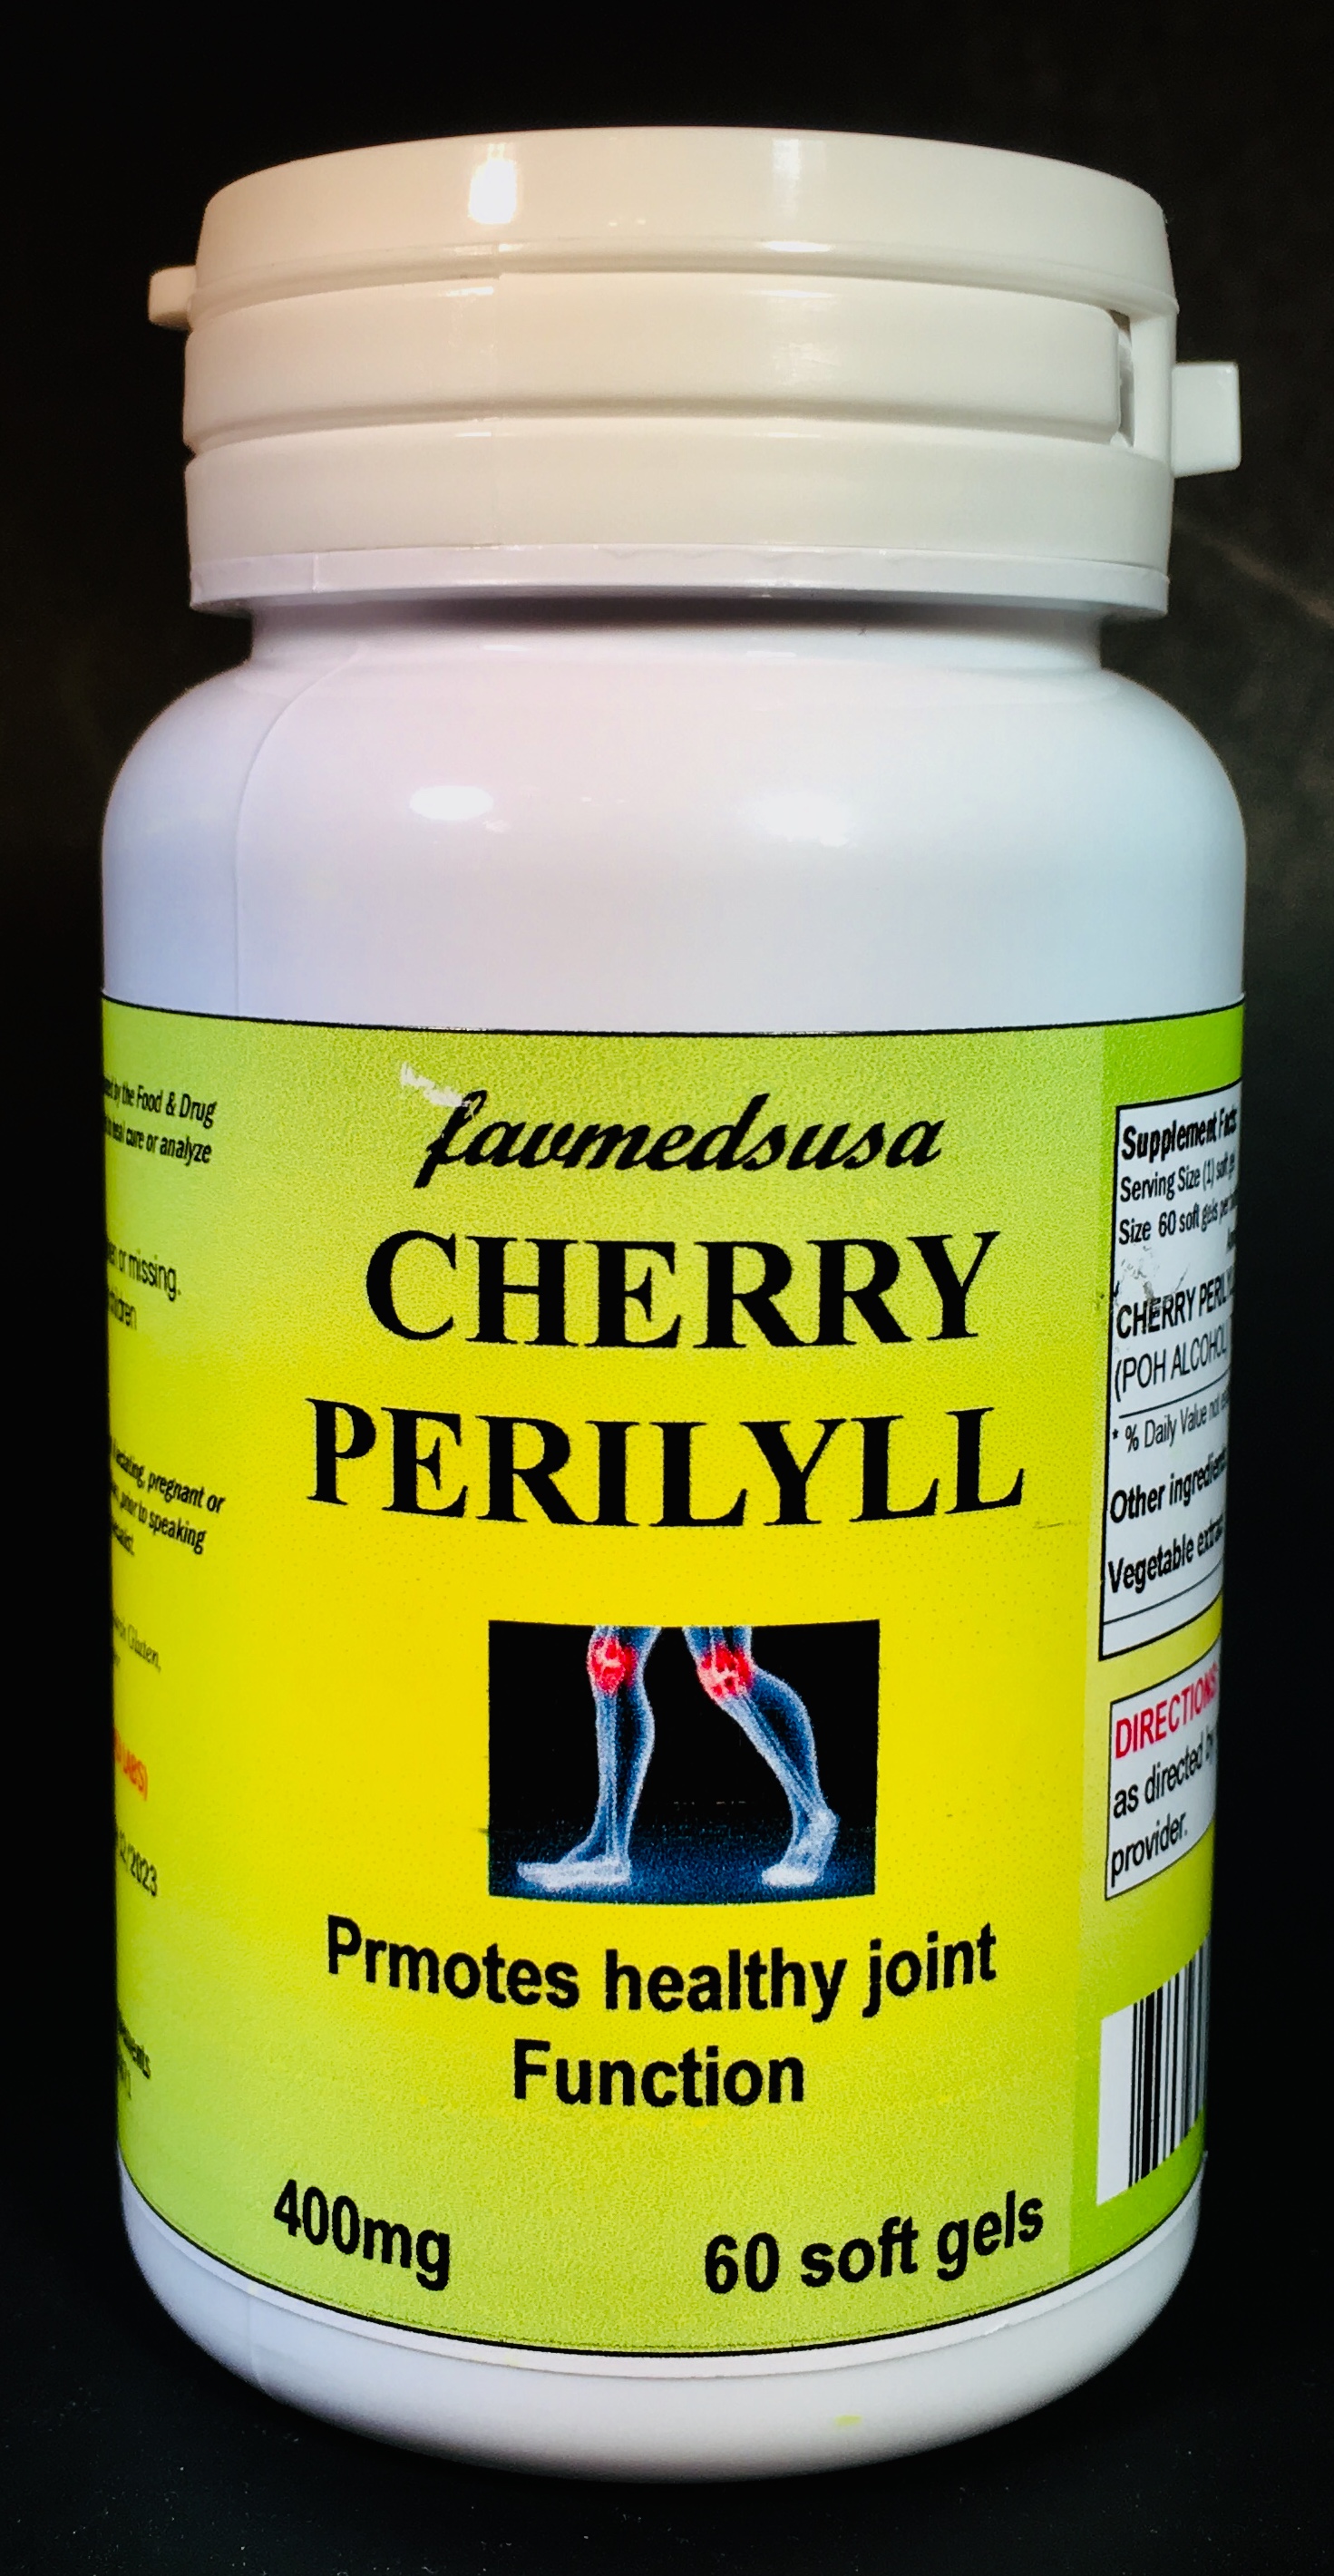 Cherry Perrillyl, Gout aid - 60 soft gels